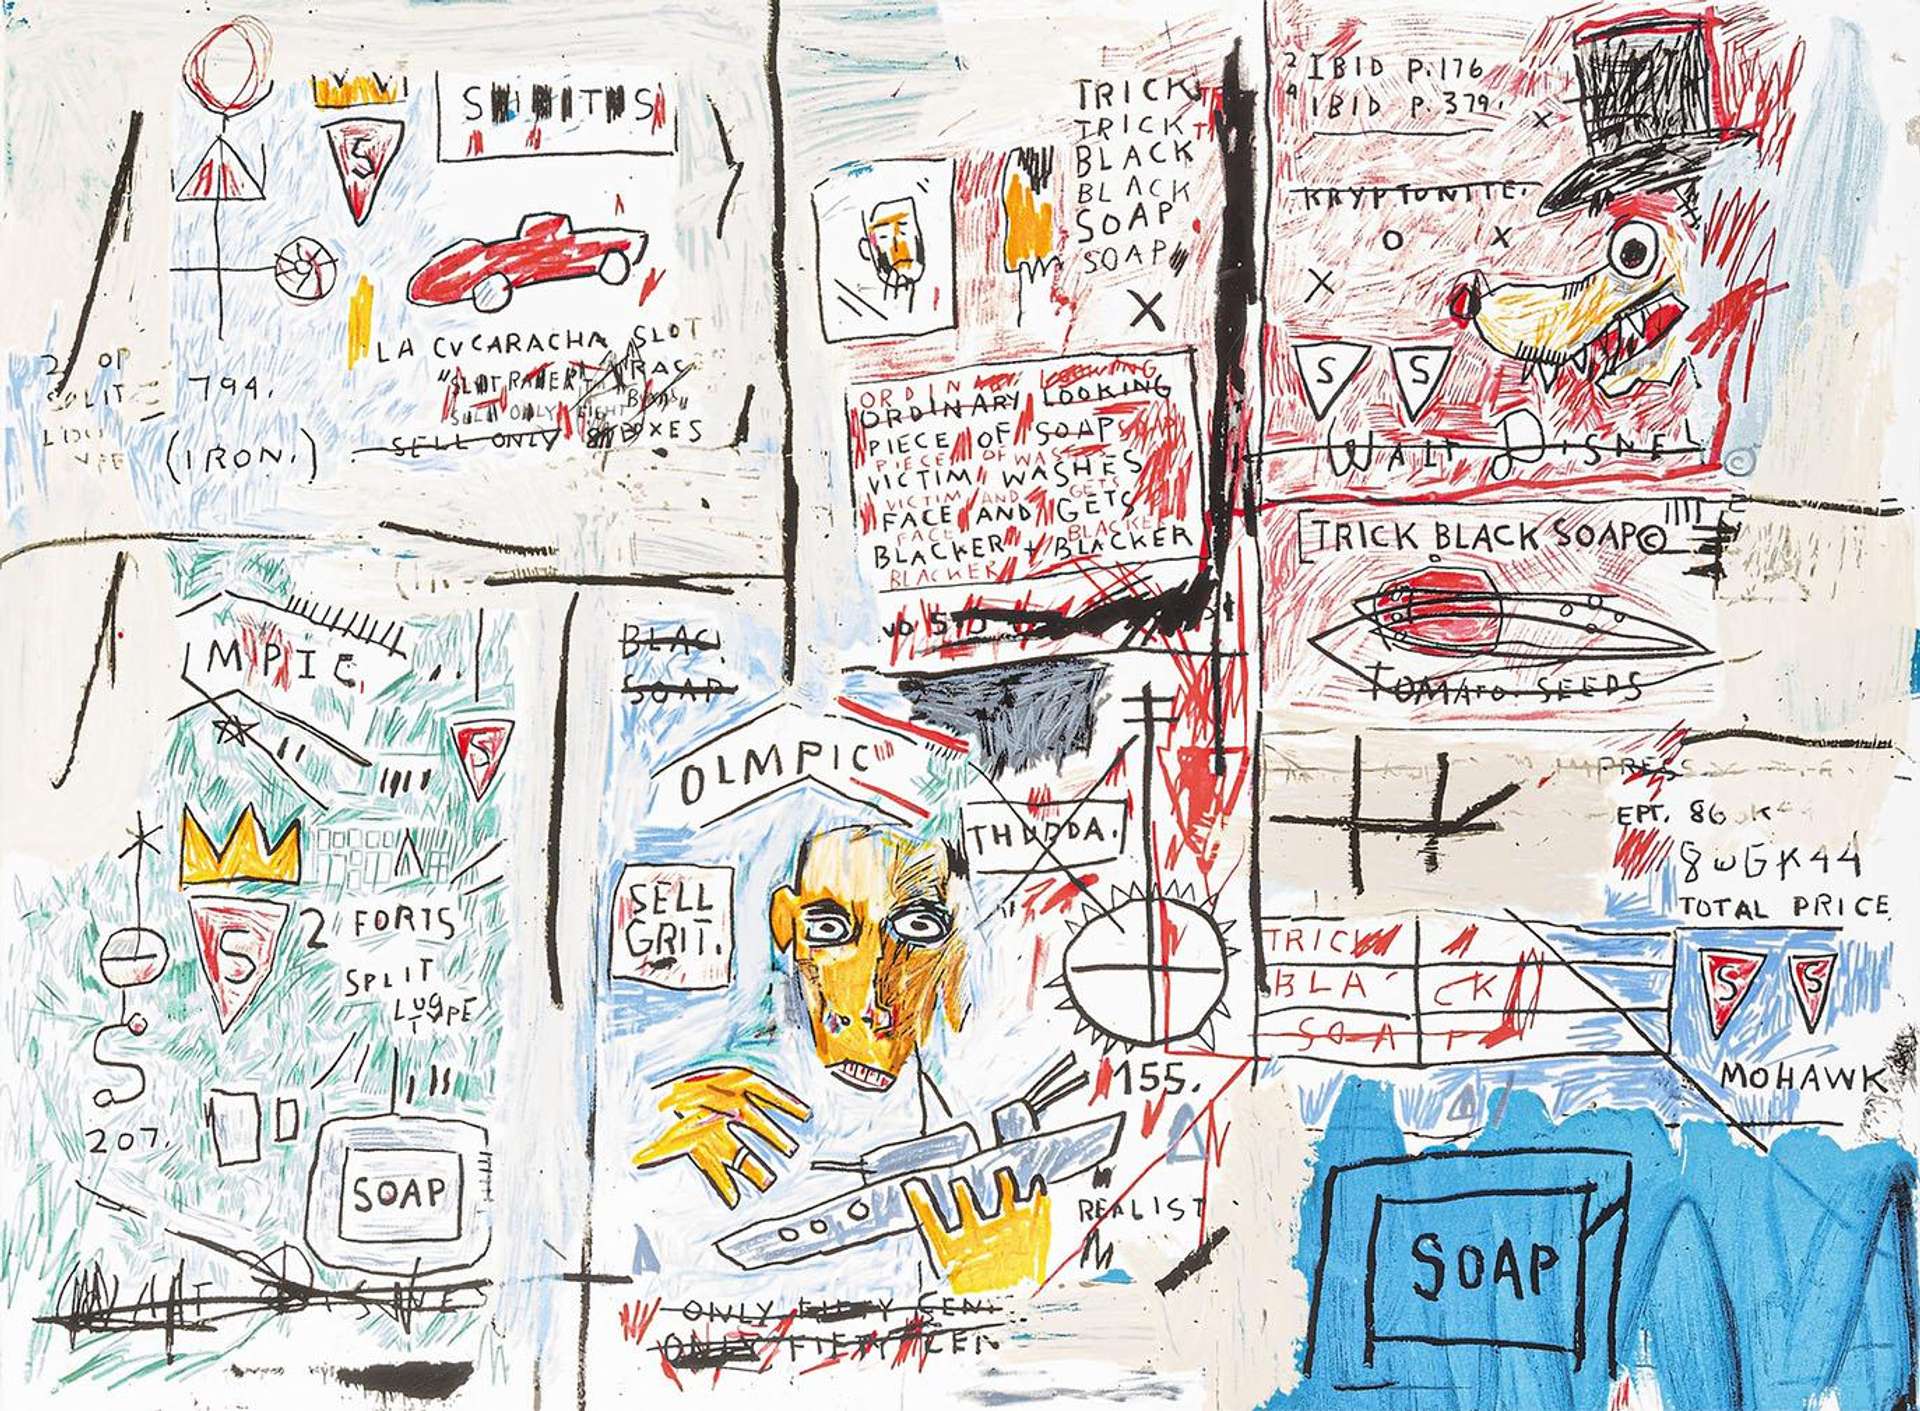 A mixed media artwork titled "Olympic" created by Jean-Michel Basquiat in 1984, featuring a central figure with a toy boat in hand, surrounded by scribbled text and roughly sketched objects.